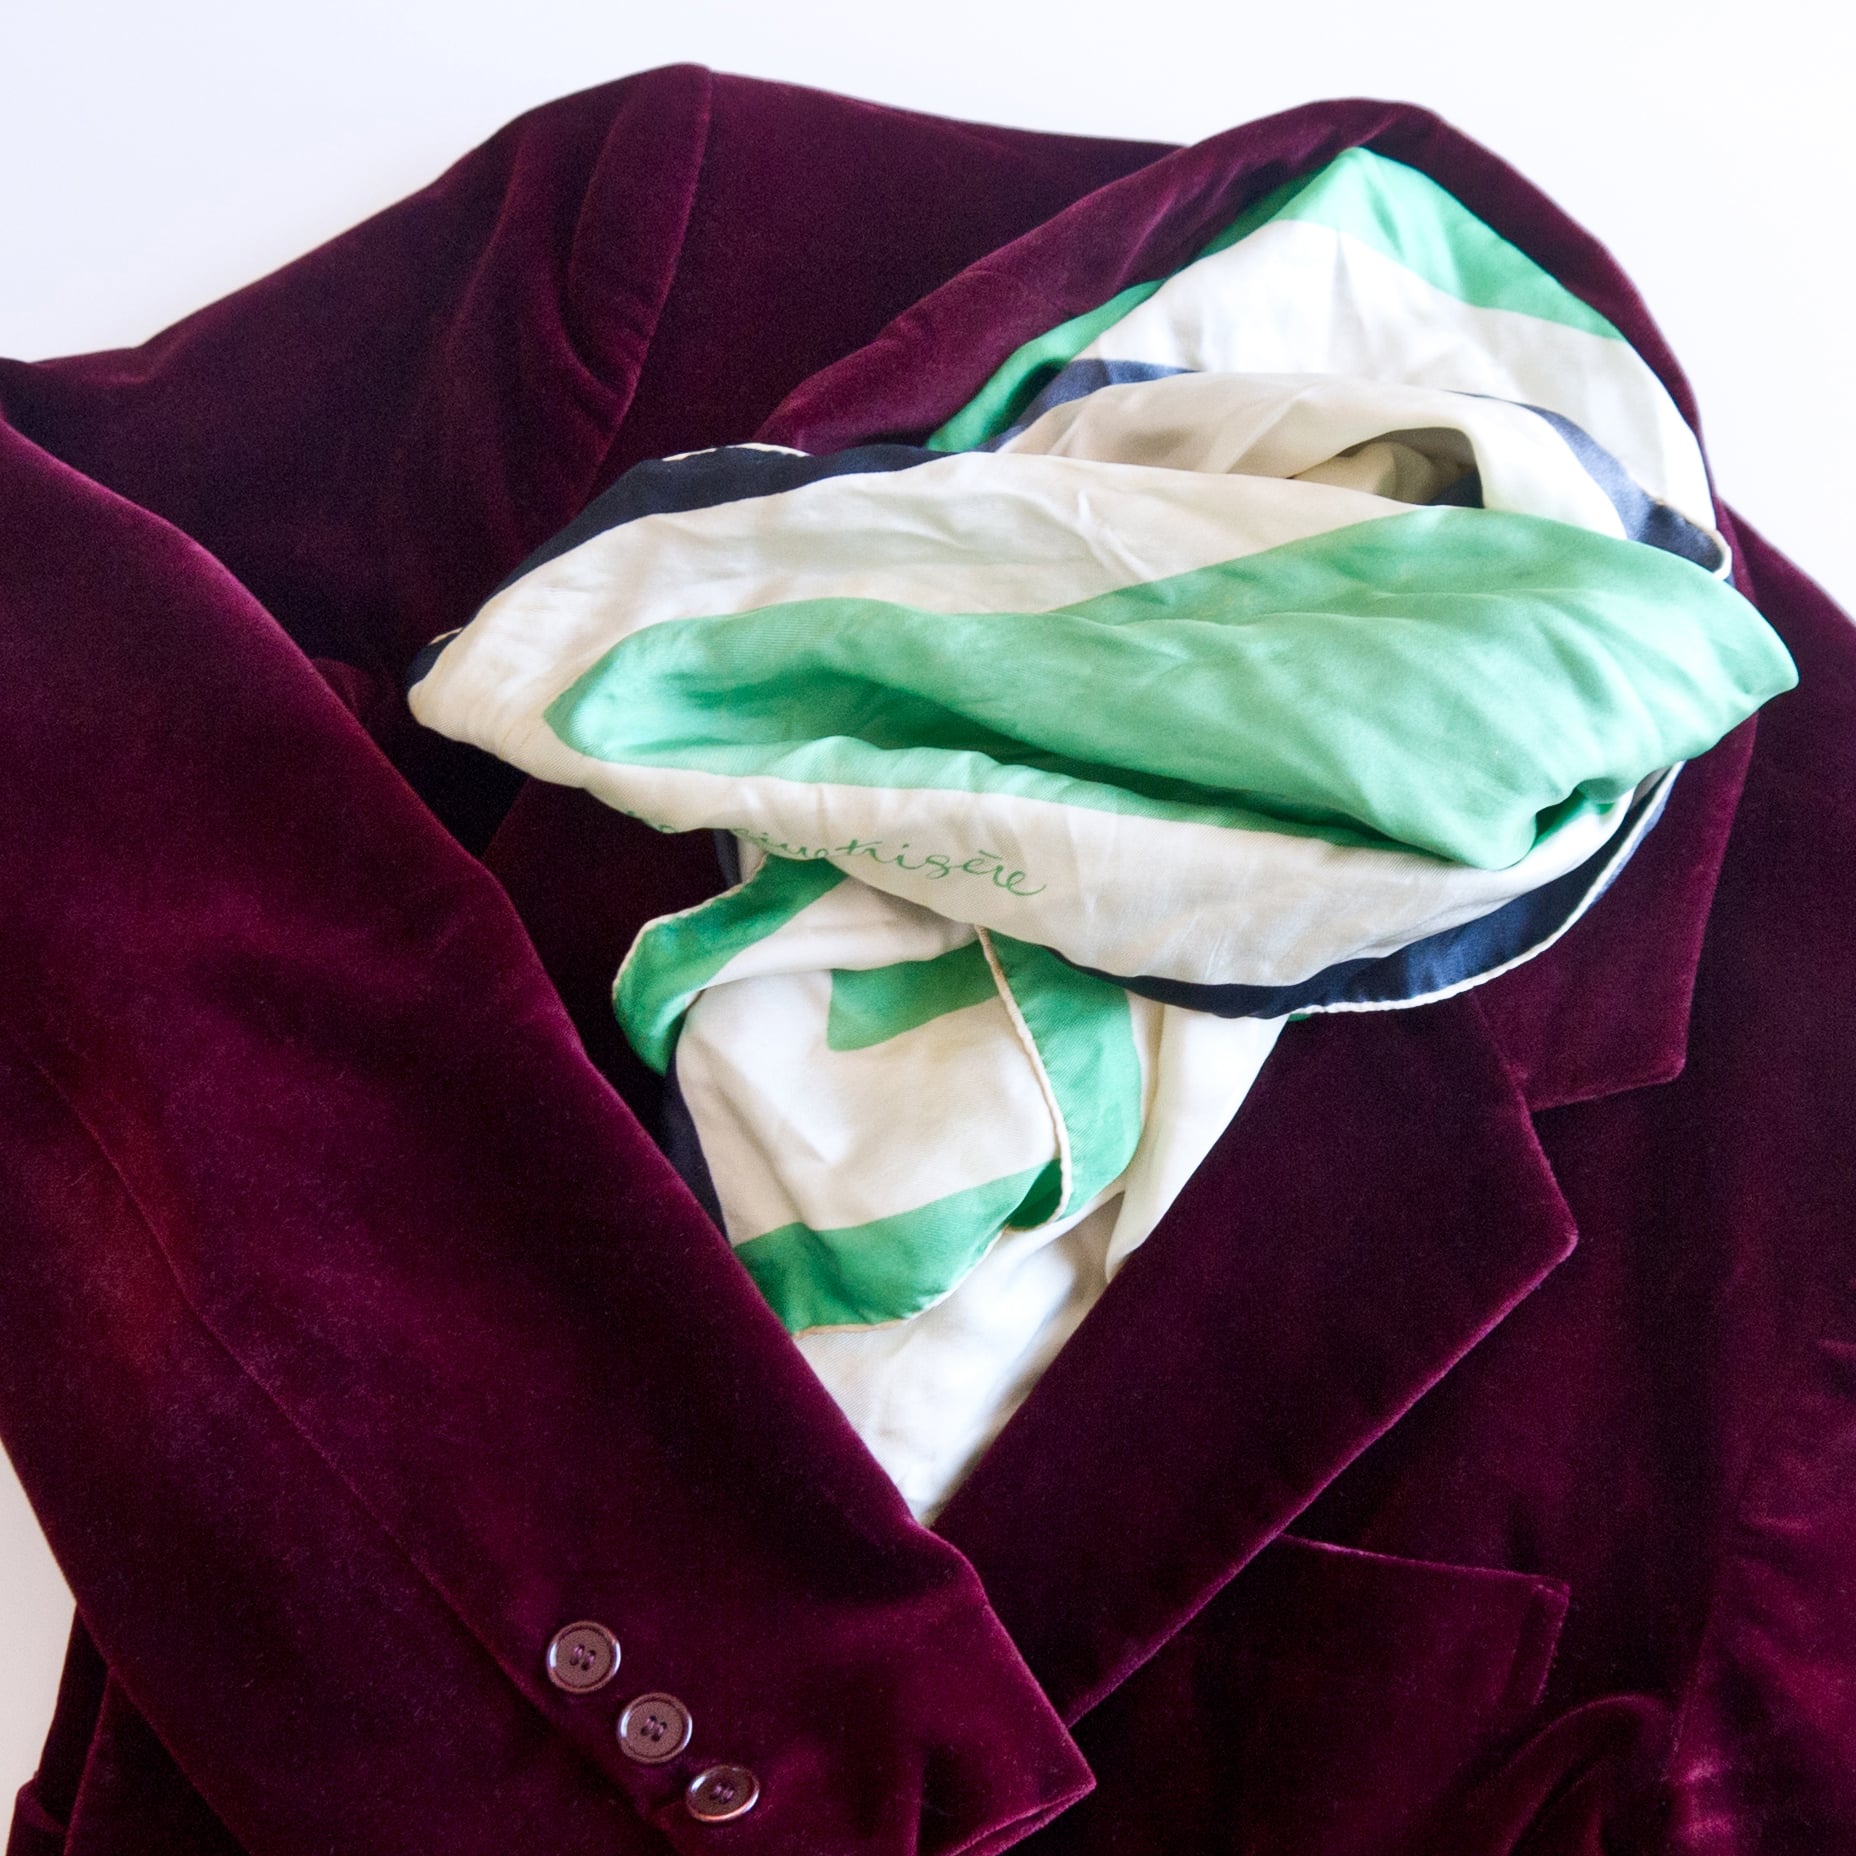 How To Make Your Own At-Home Dry Cleaner